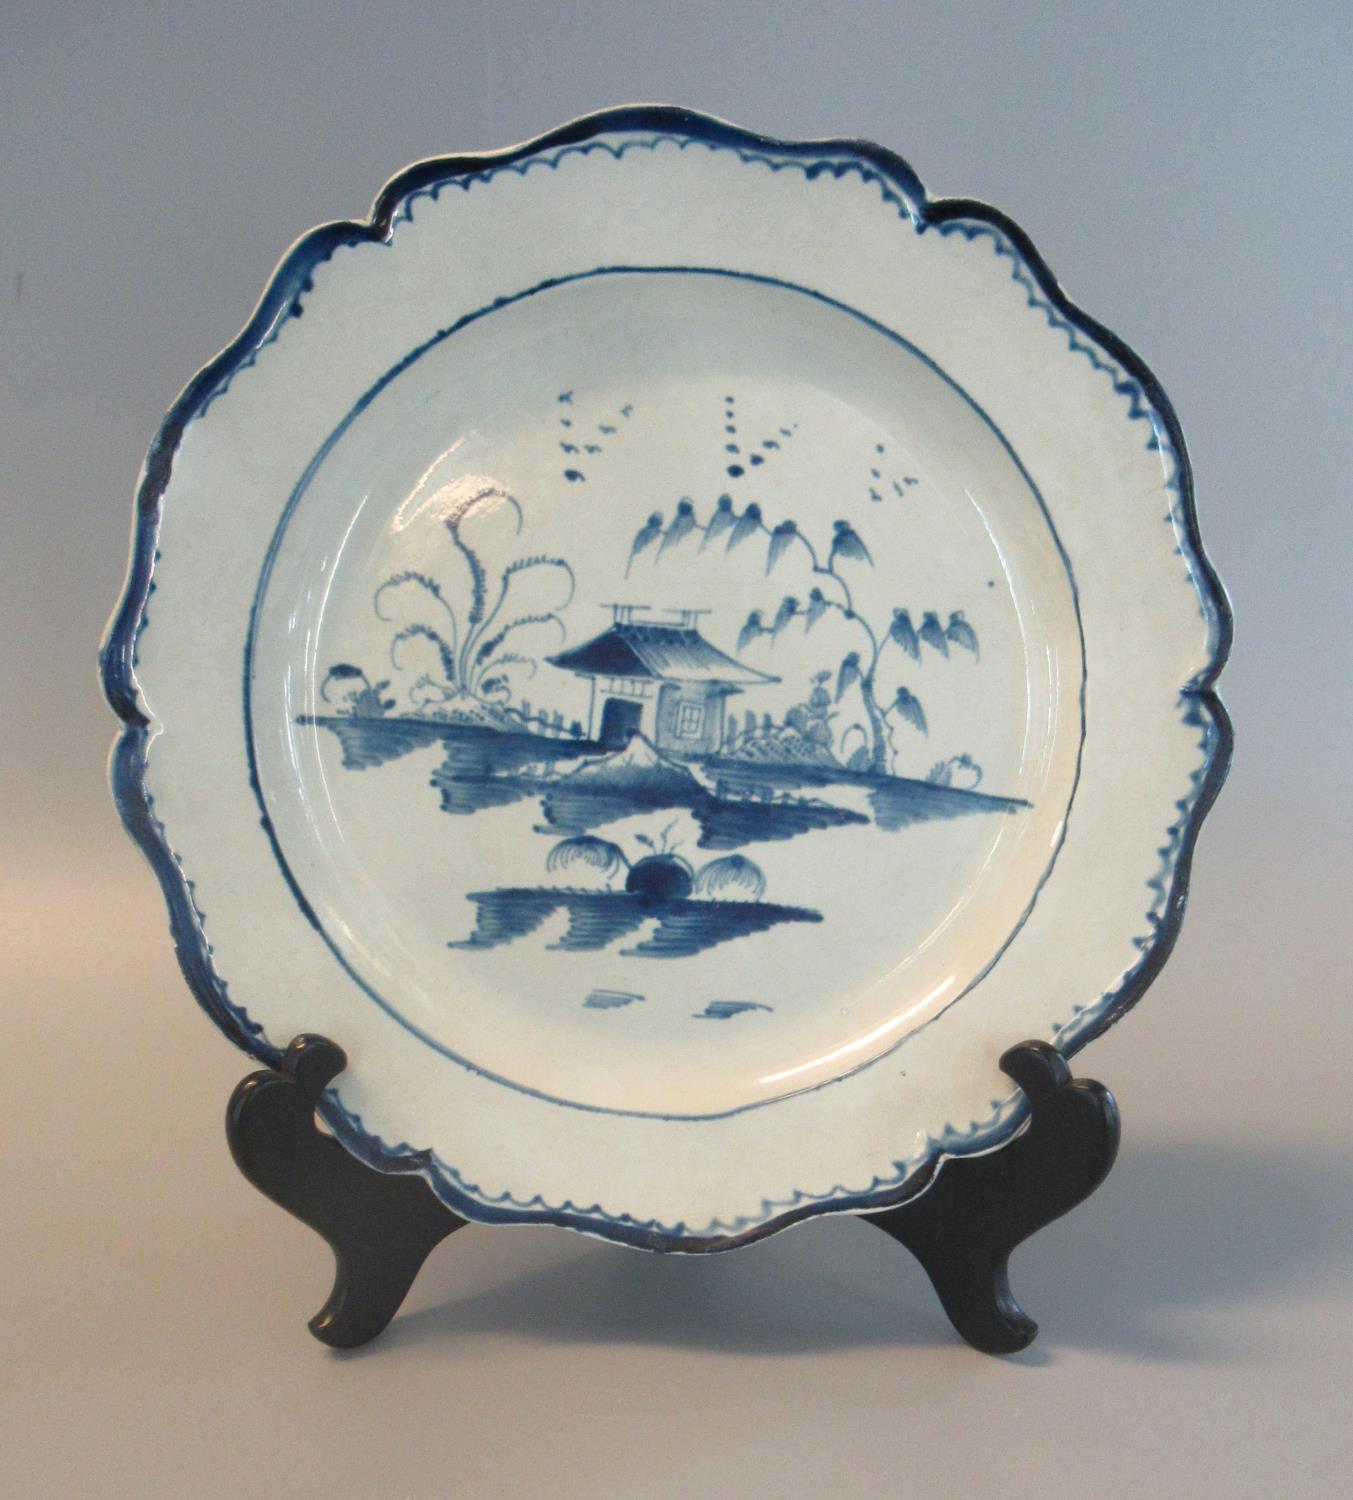 19th century English pearlware indented rim plate with hand painted underglaze blue pagoda